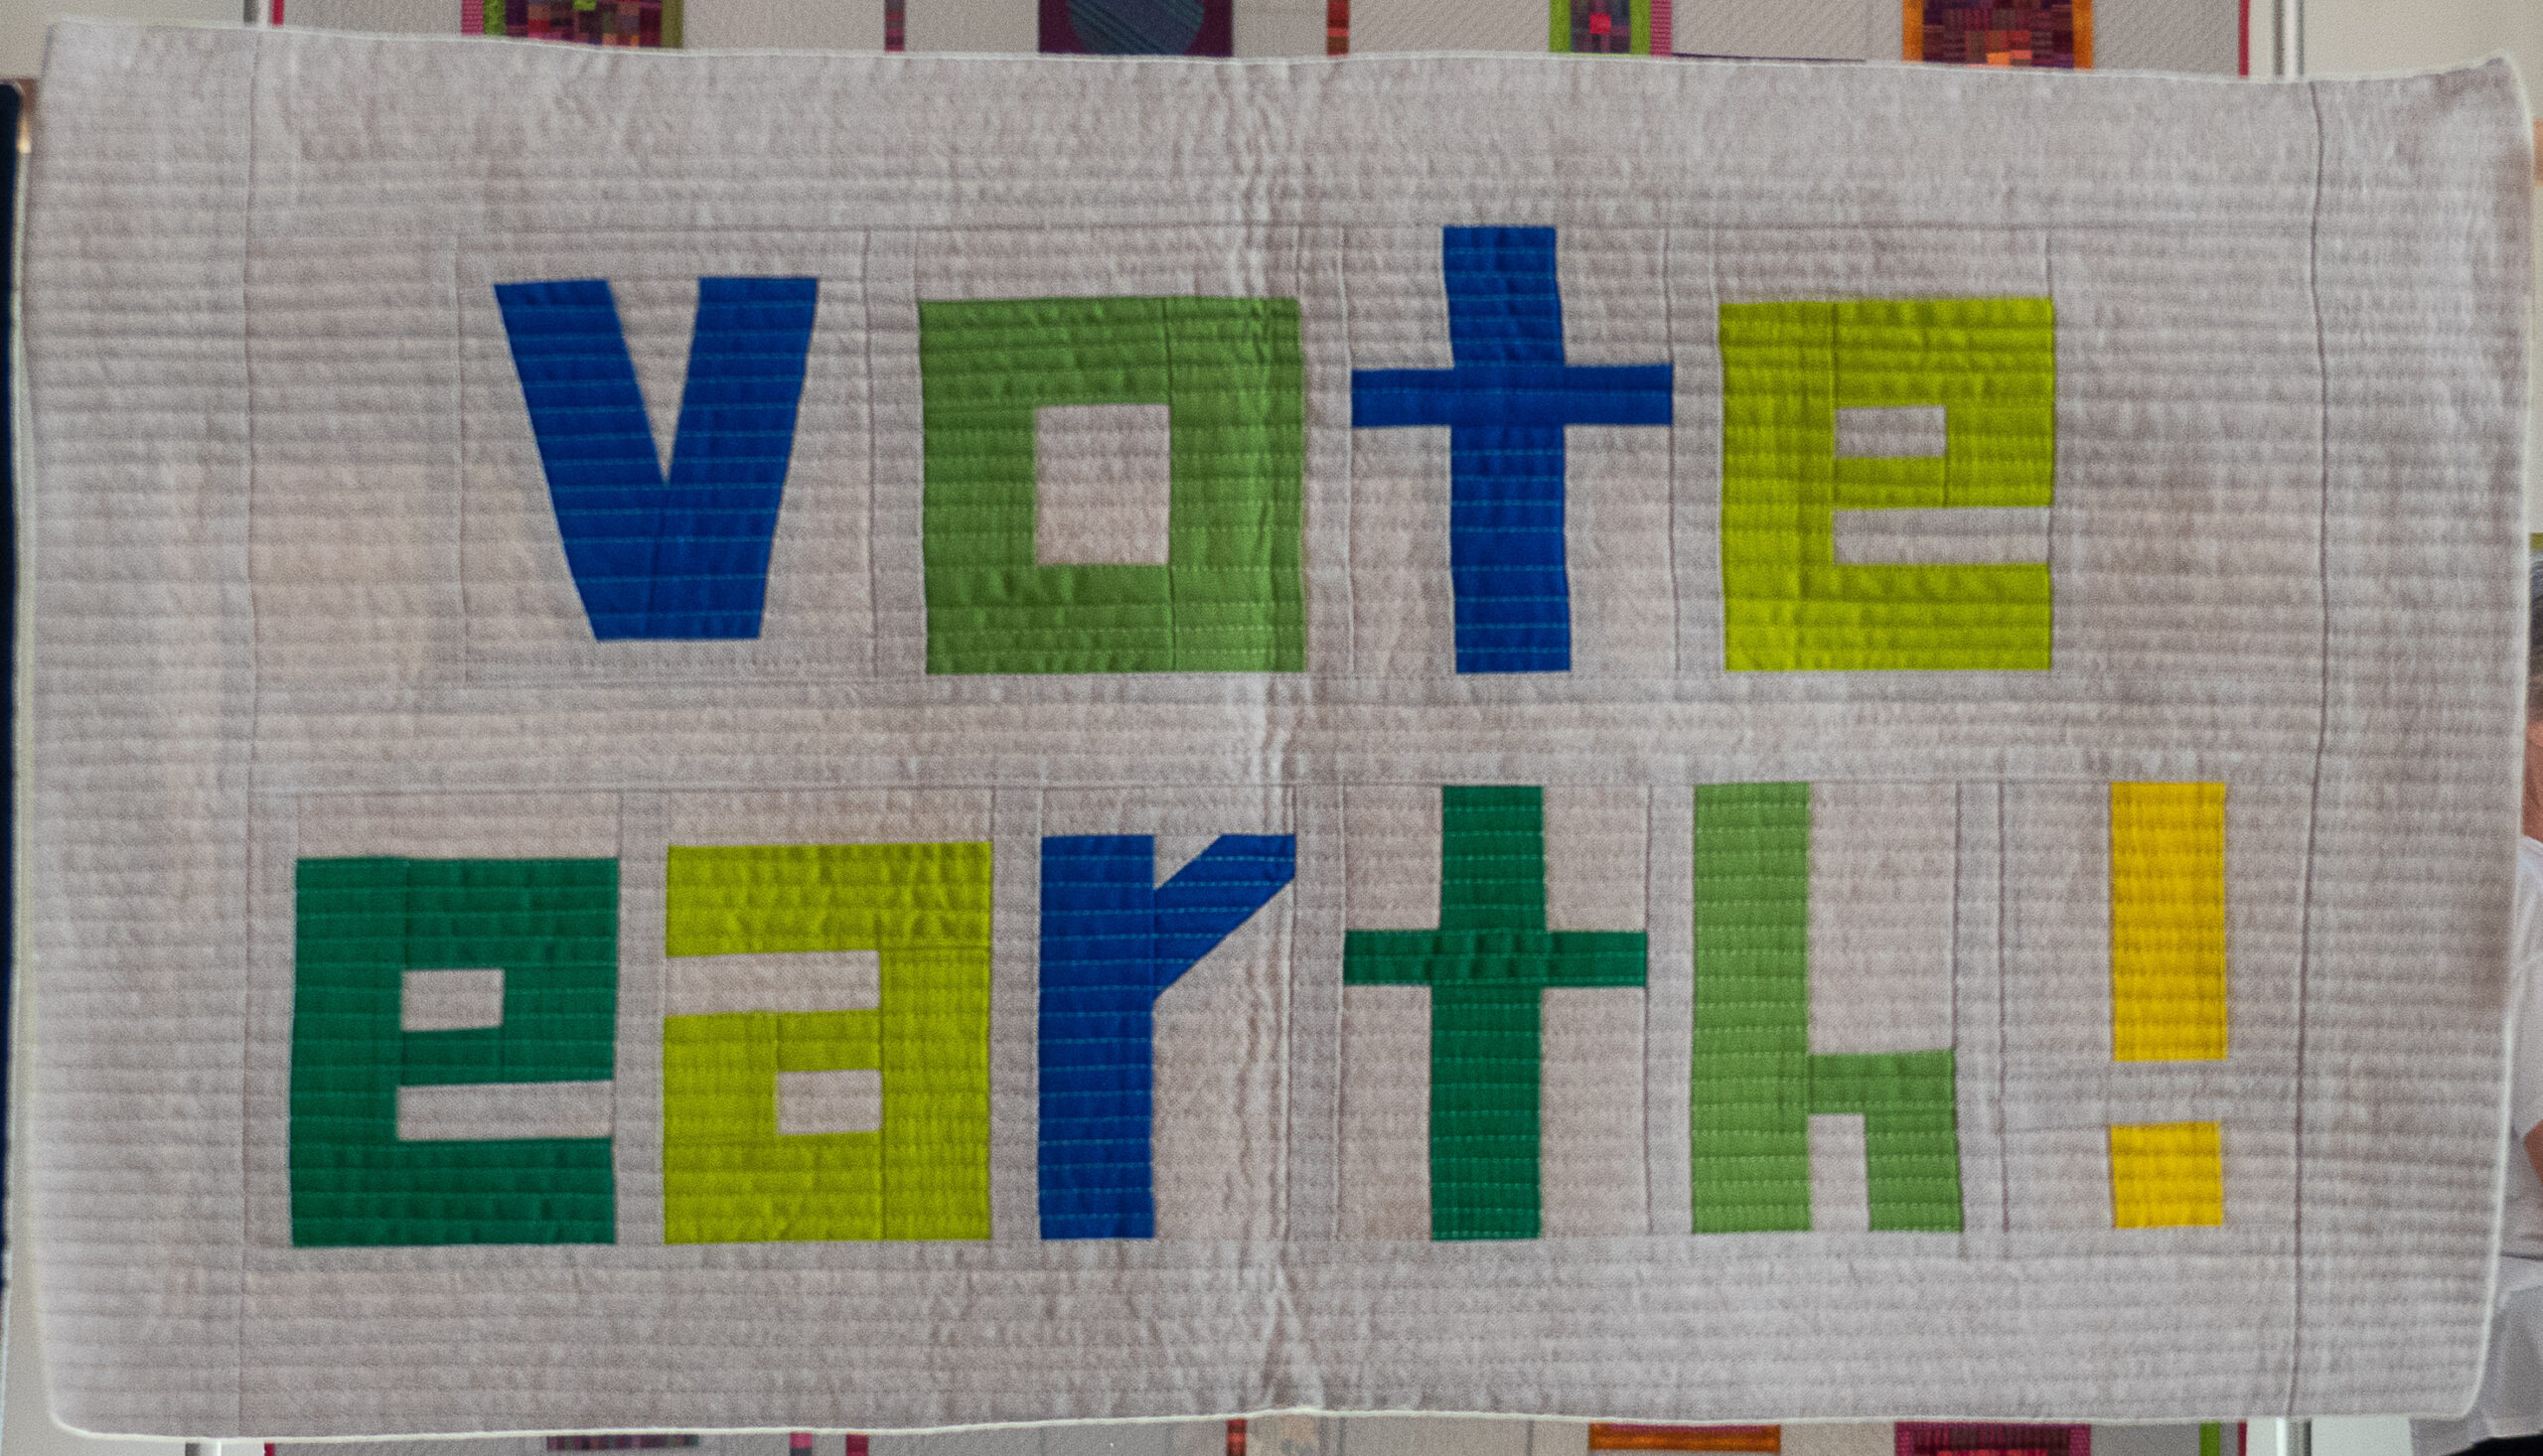 modern quilt with the words "vote earth"